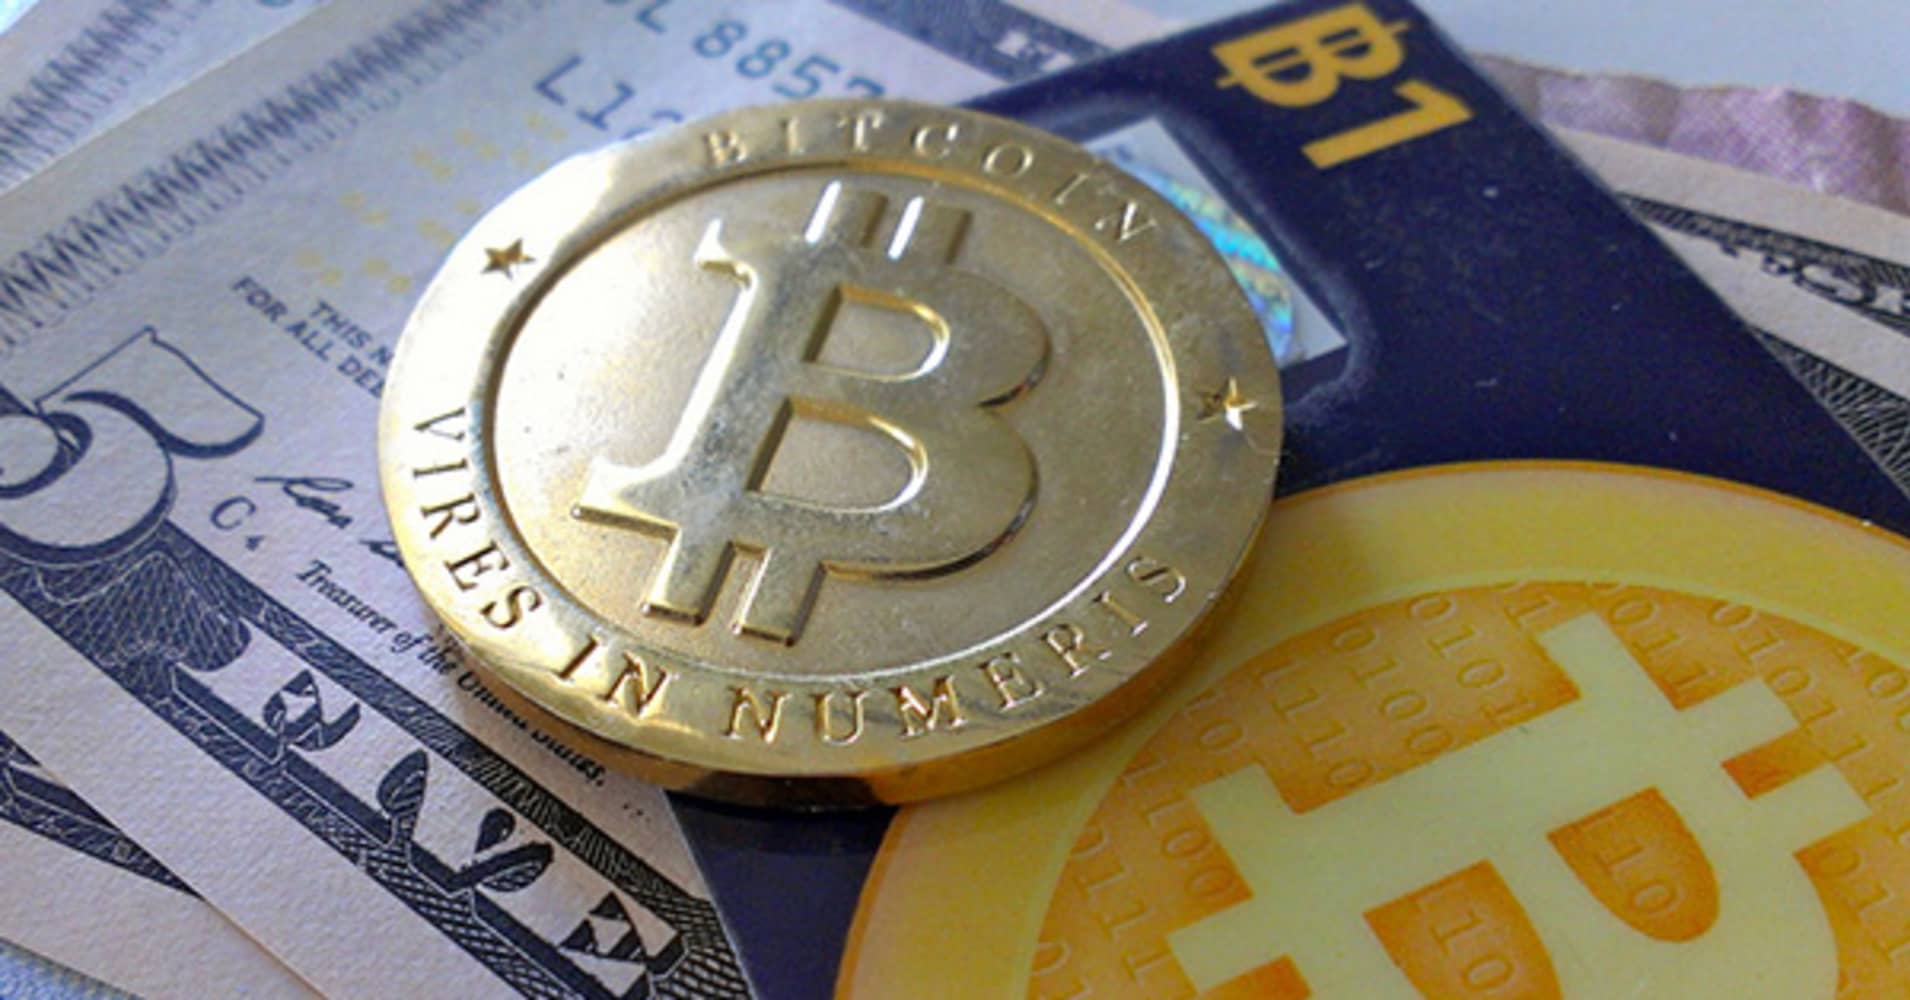 http://fm.cnbc.com/applications/cnbc.com/resources/img/editorial/2013/04/10/100630649-bitcoin-with-money-zach-copley-flickr.1910x1000.jpg